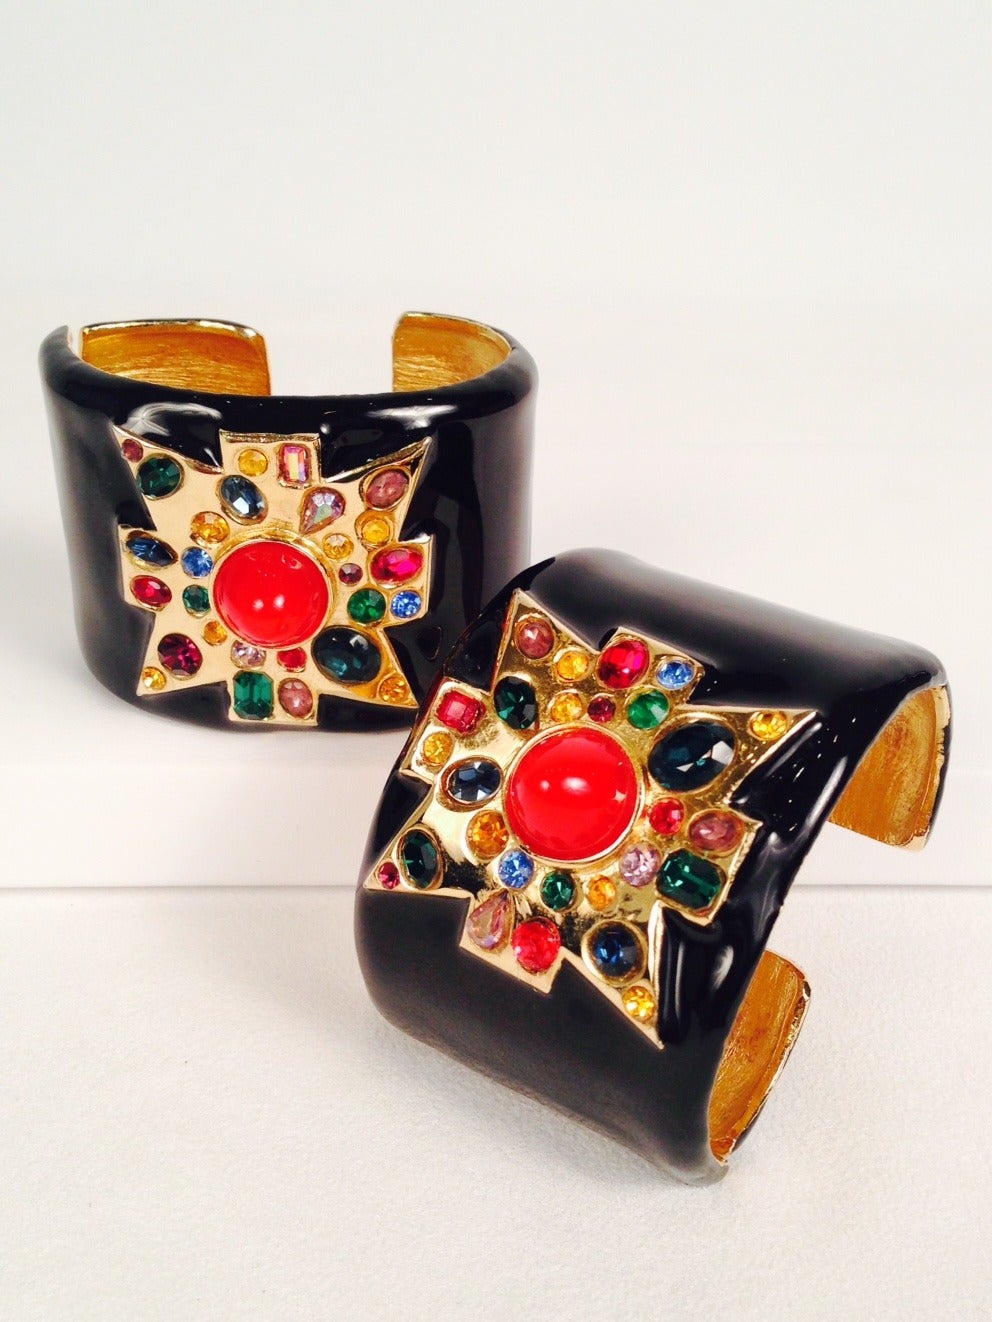 Kenneth Lane Black Enamel Cuff with Jeweled Maltese Cross pays homage to the Art Deco period and Jazz Age!  Features multi-colored faceted and cabochon stones and the most lustrous black enamel.  Side hinge allows for comfortable placement on wrist 